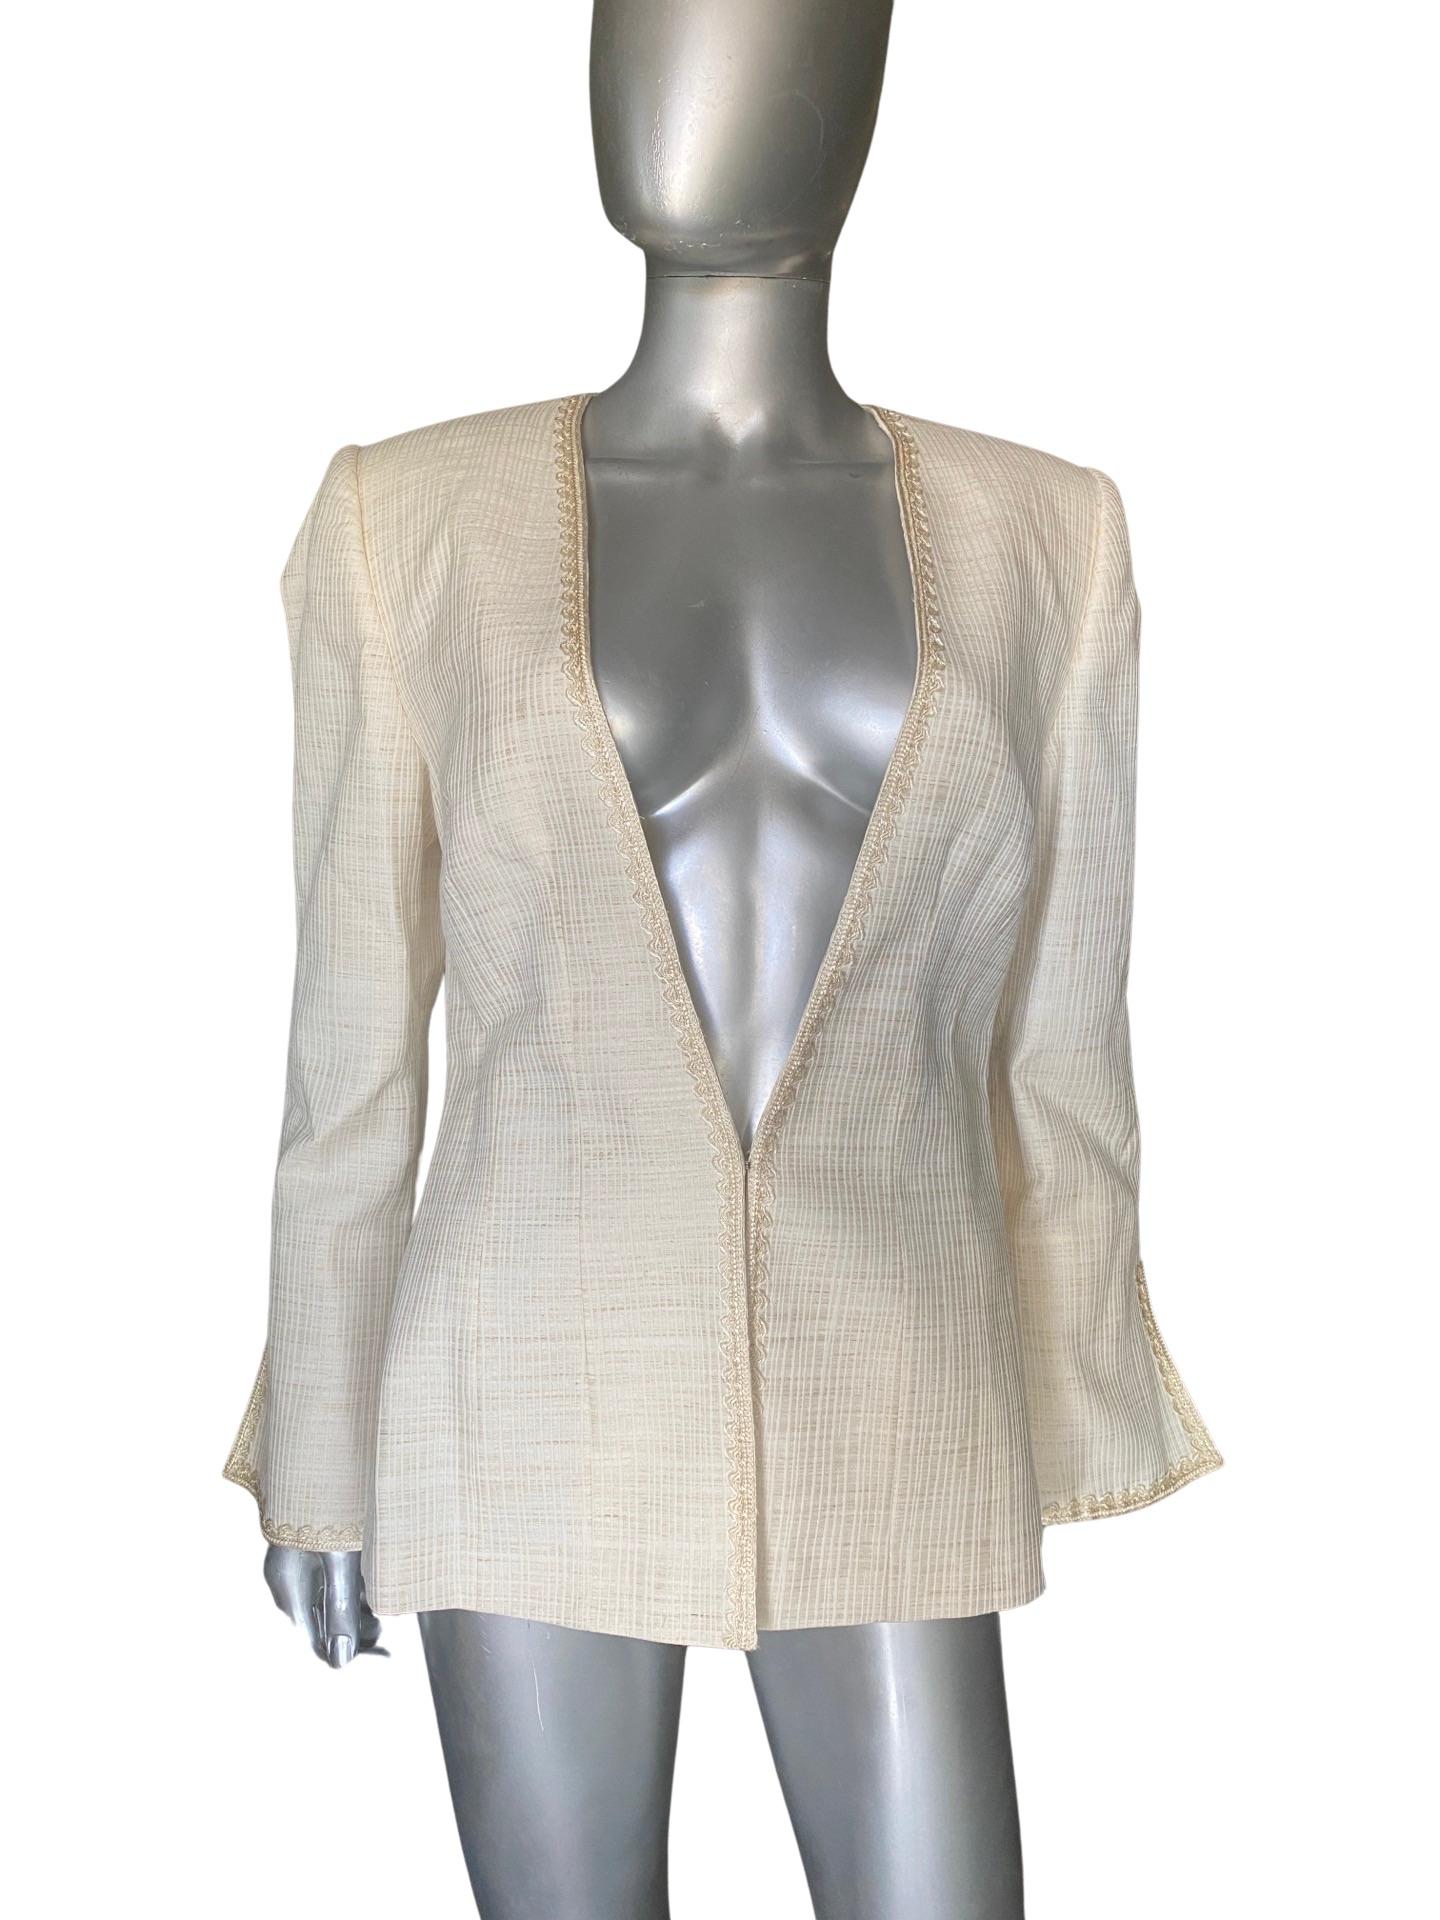 Women's Fe Zandi Chic Custom Made Embroidered Linen Blend Jacket Size 12 For Sale